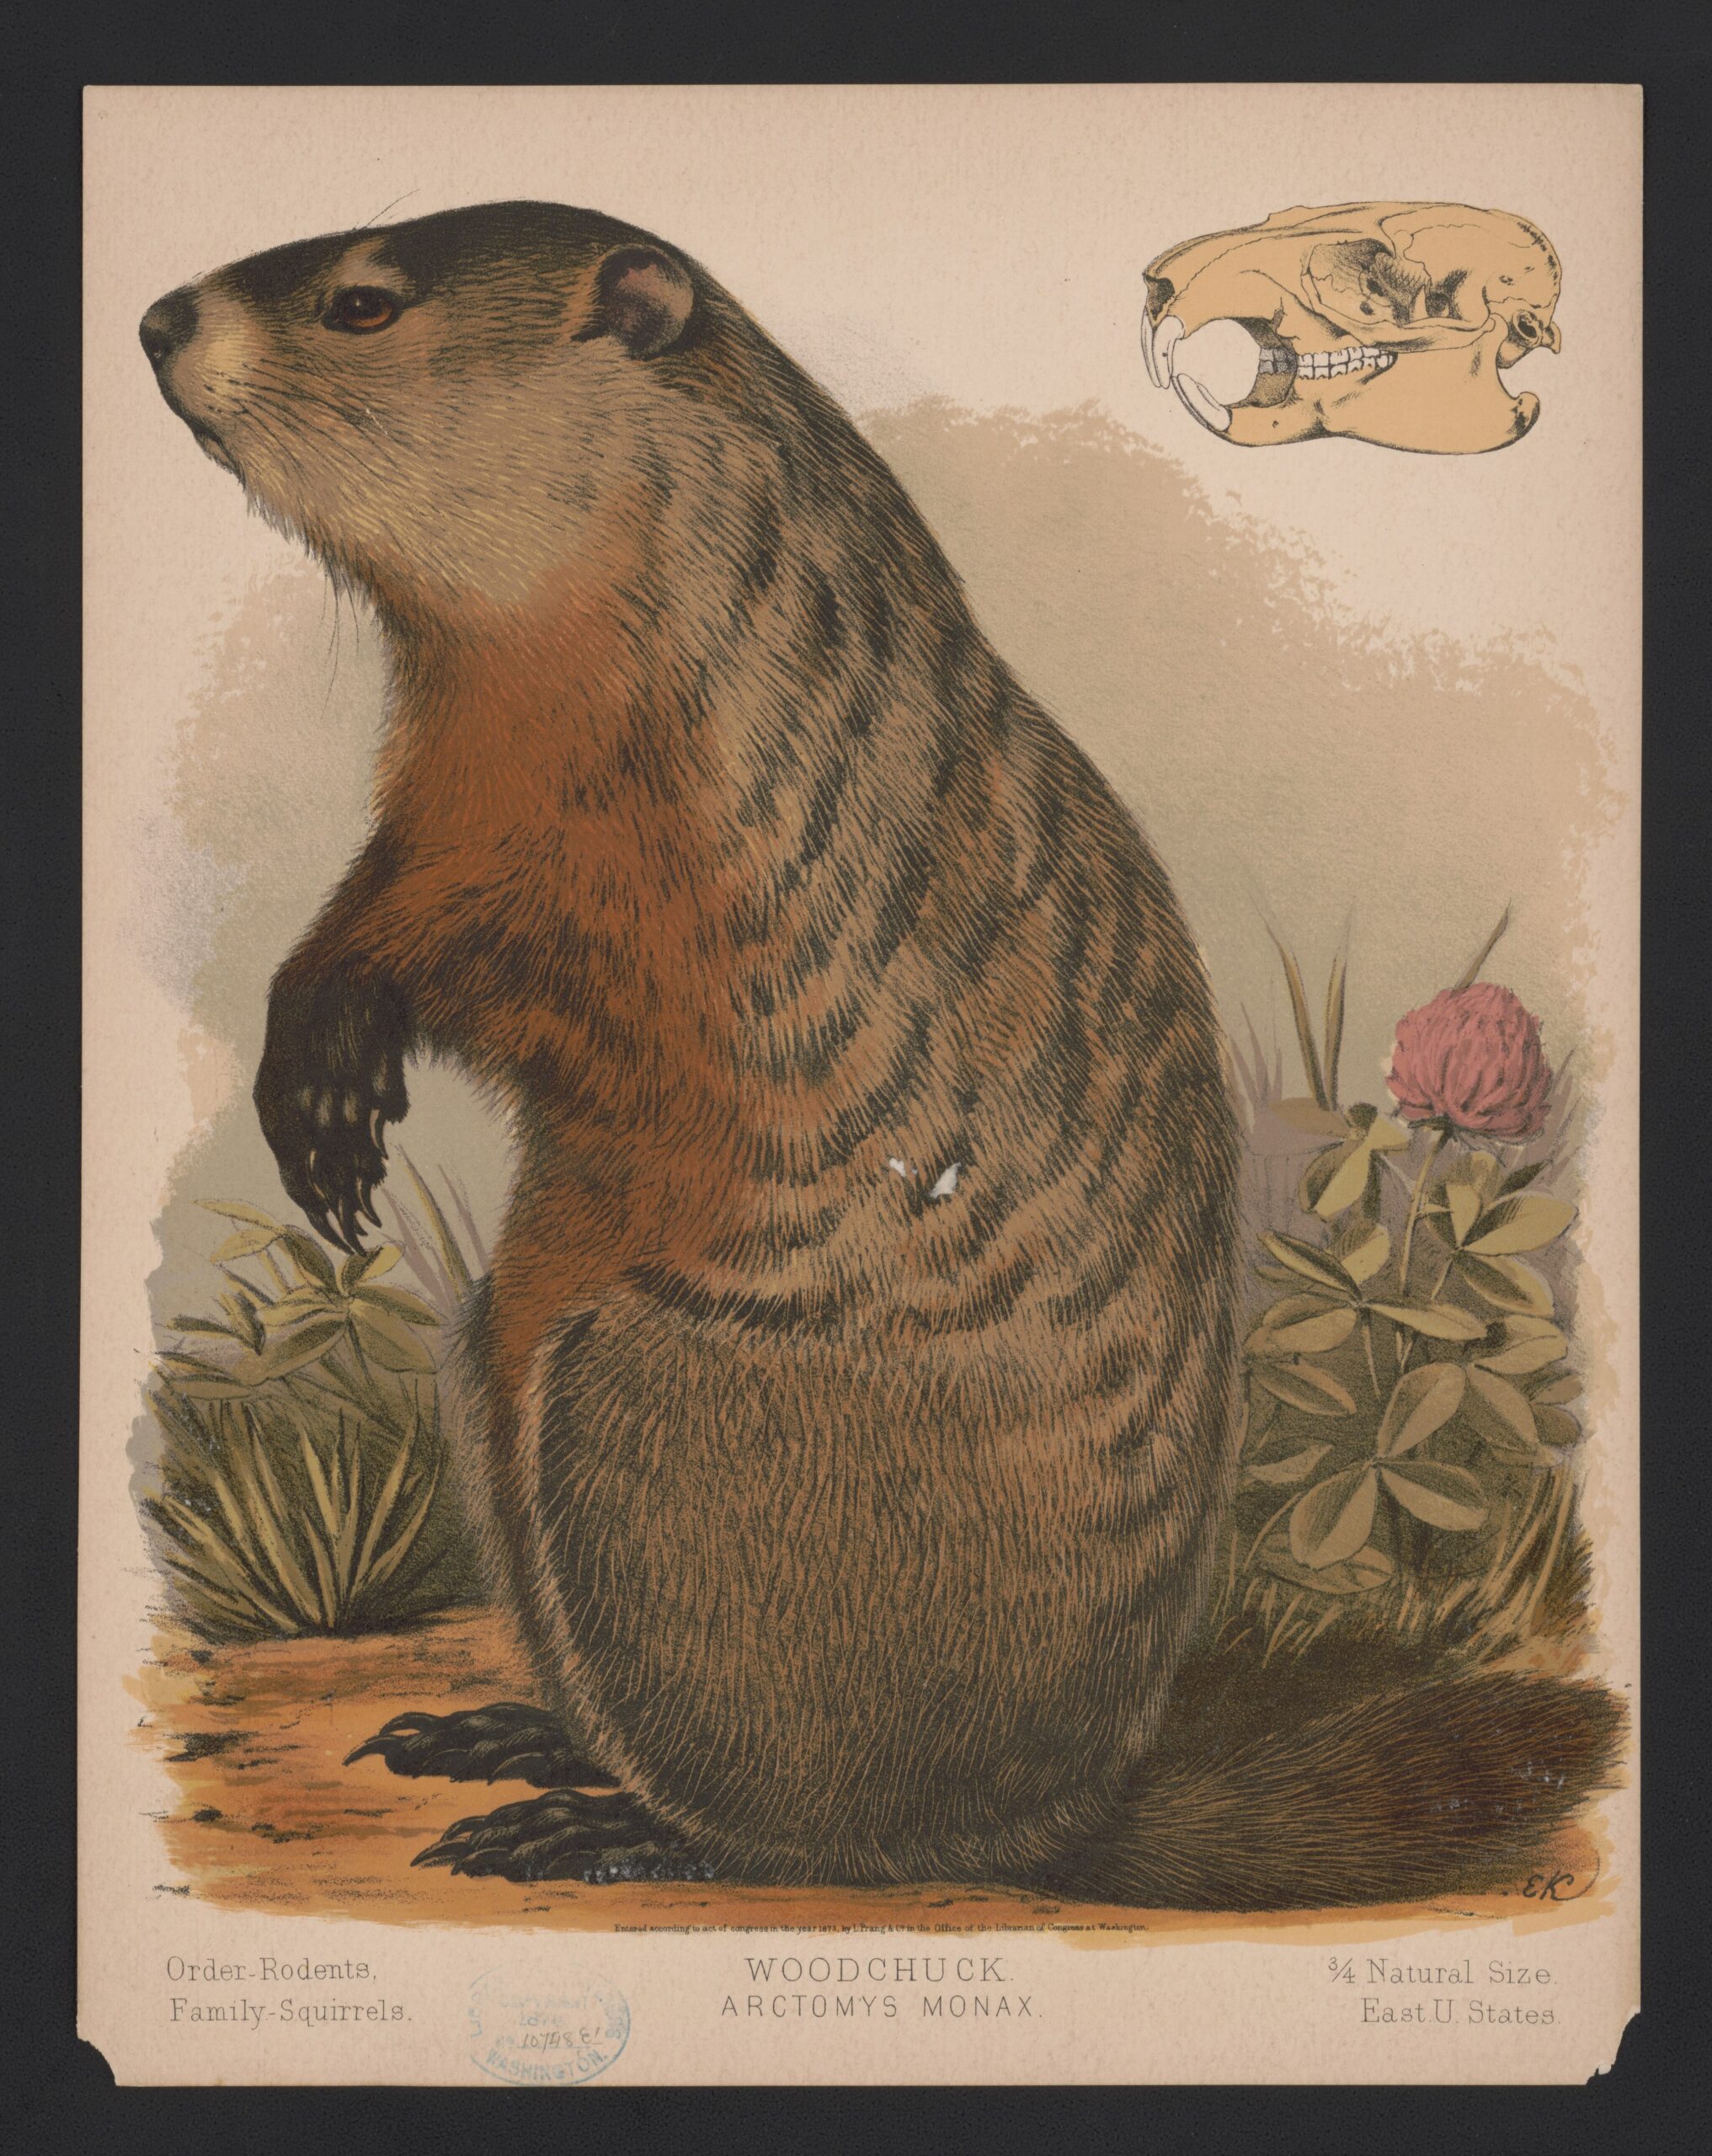 The noble woodchuck